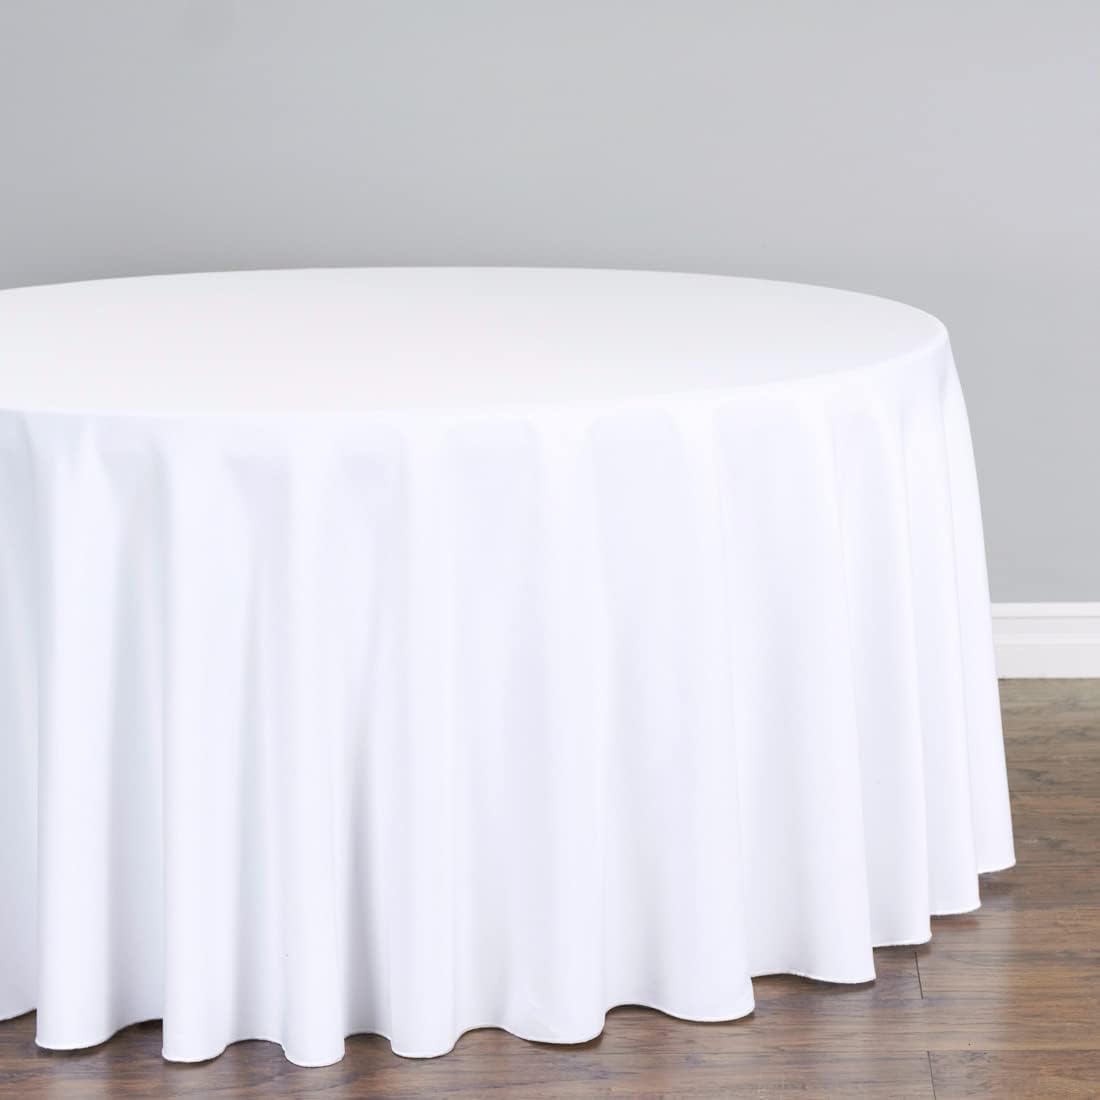 LTC LINENS 120 in Round Tablecloth for 60 Inch Round Table - White Round Table Cover - Washable, Wrinkle Resistant Polyester Fabric Cloth for Wedding, Party